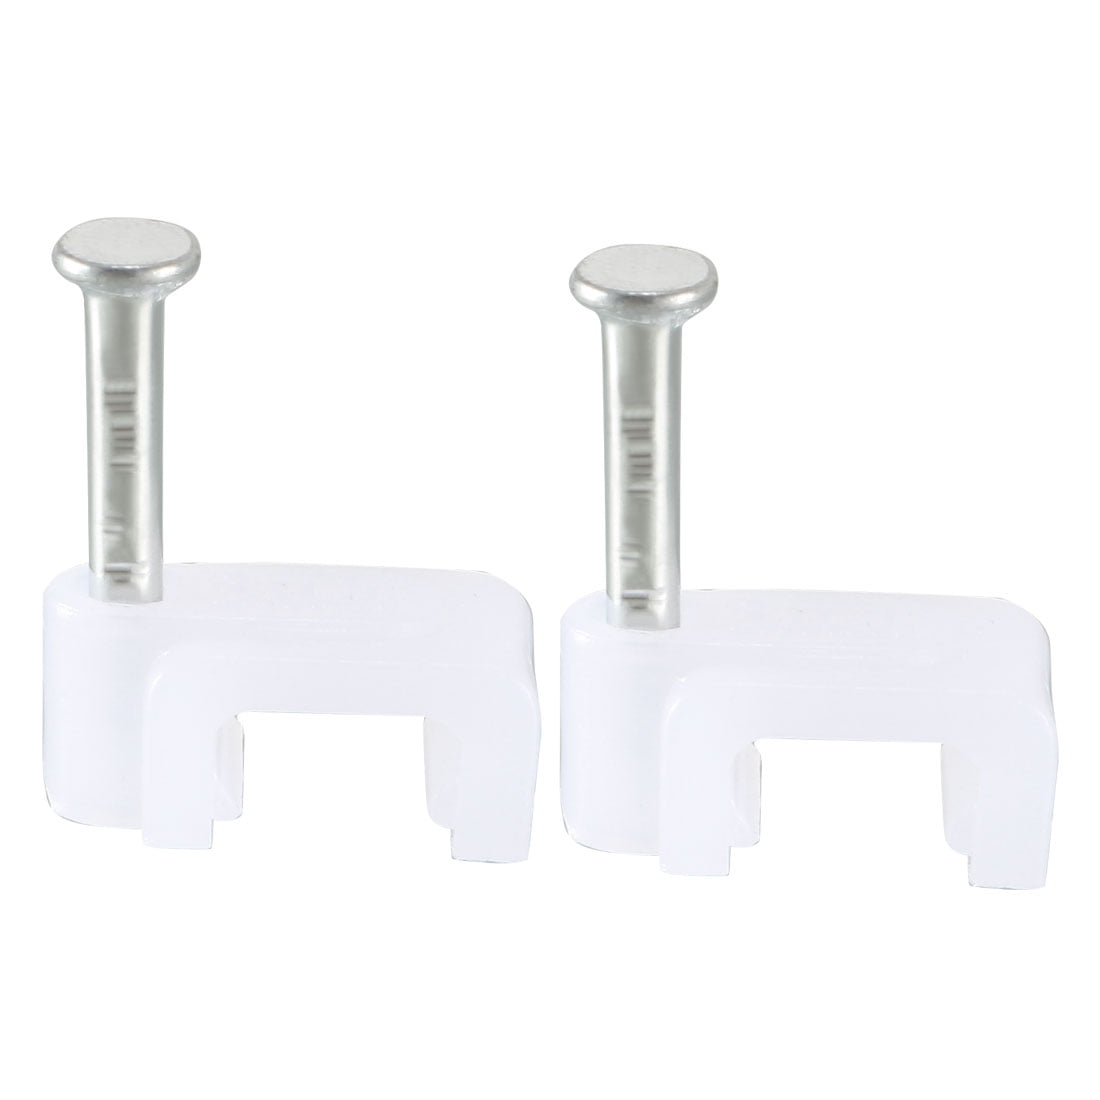 Nail-In Cable Clips for RG-6, RG-59 and Ethernet Cable - 1000 Piece Bag